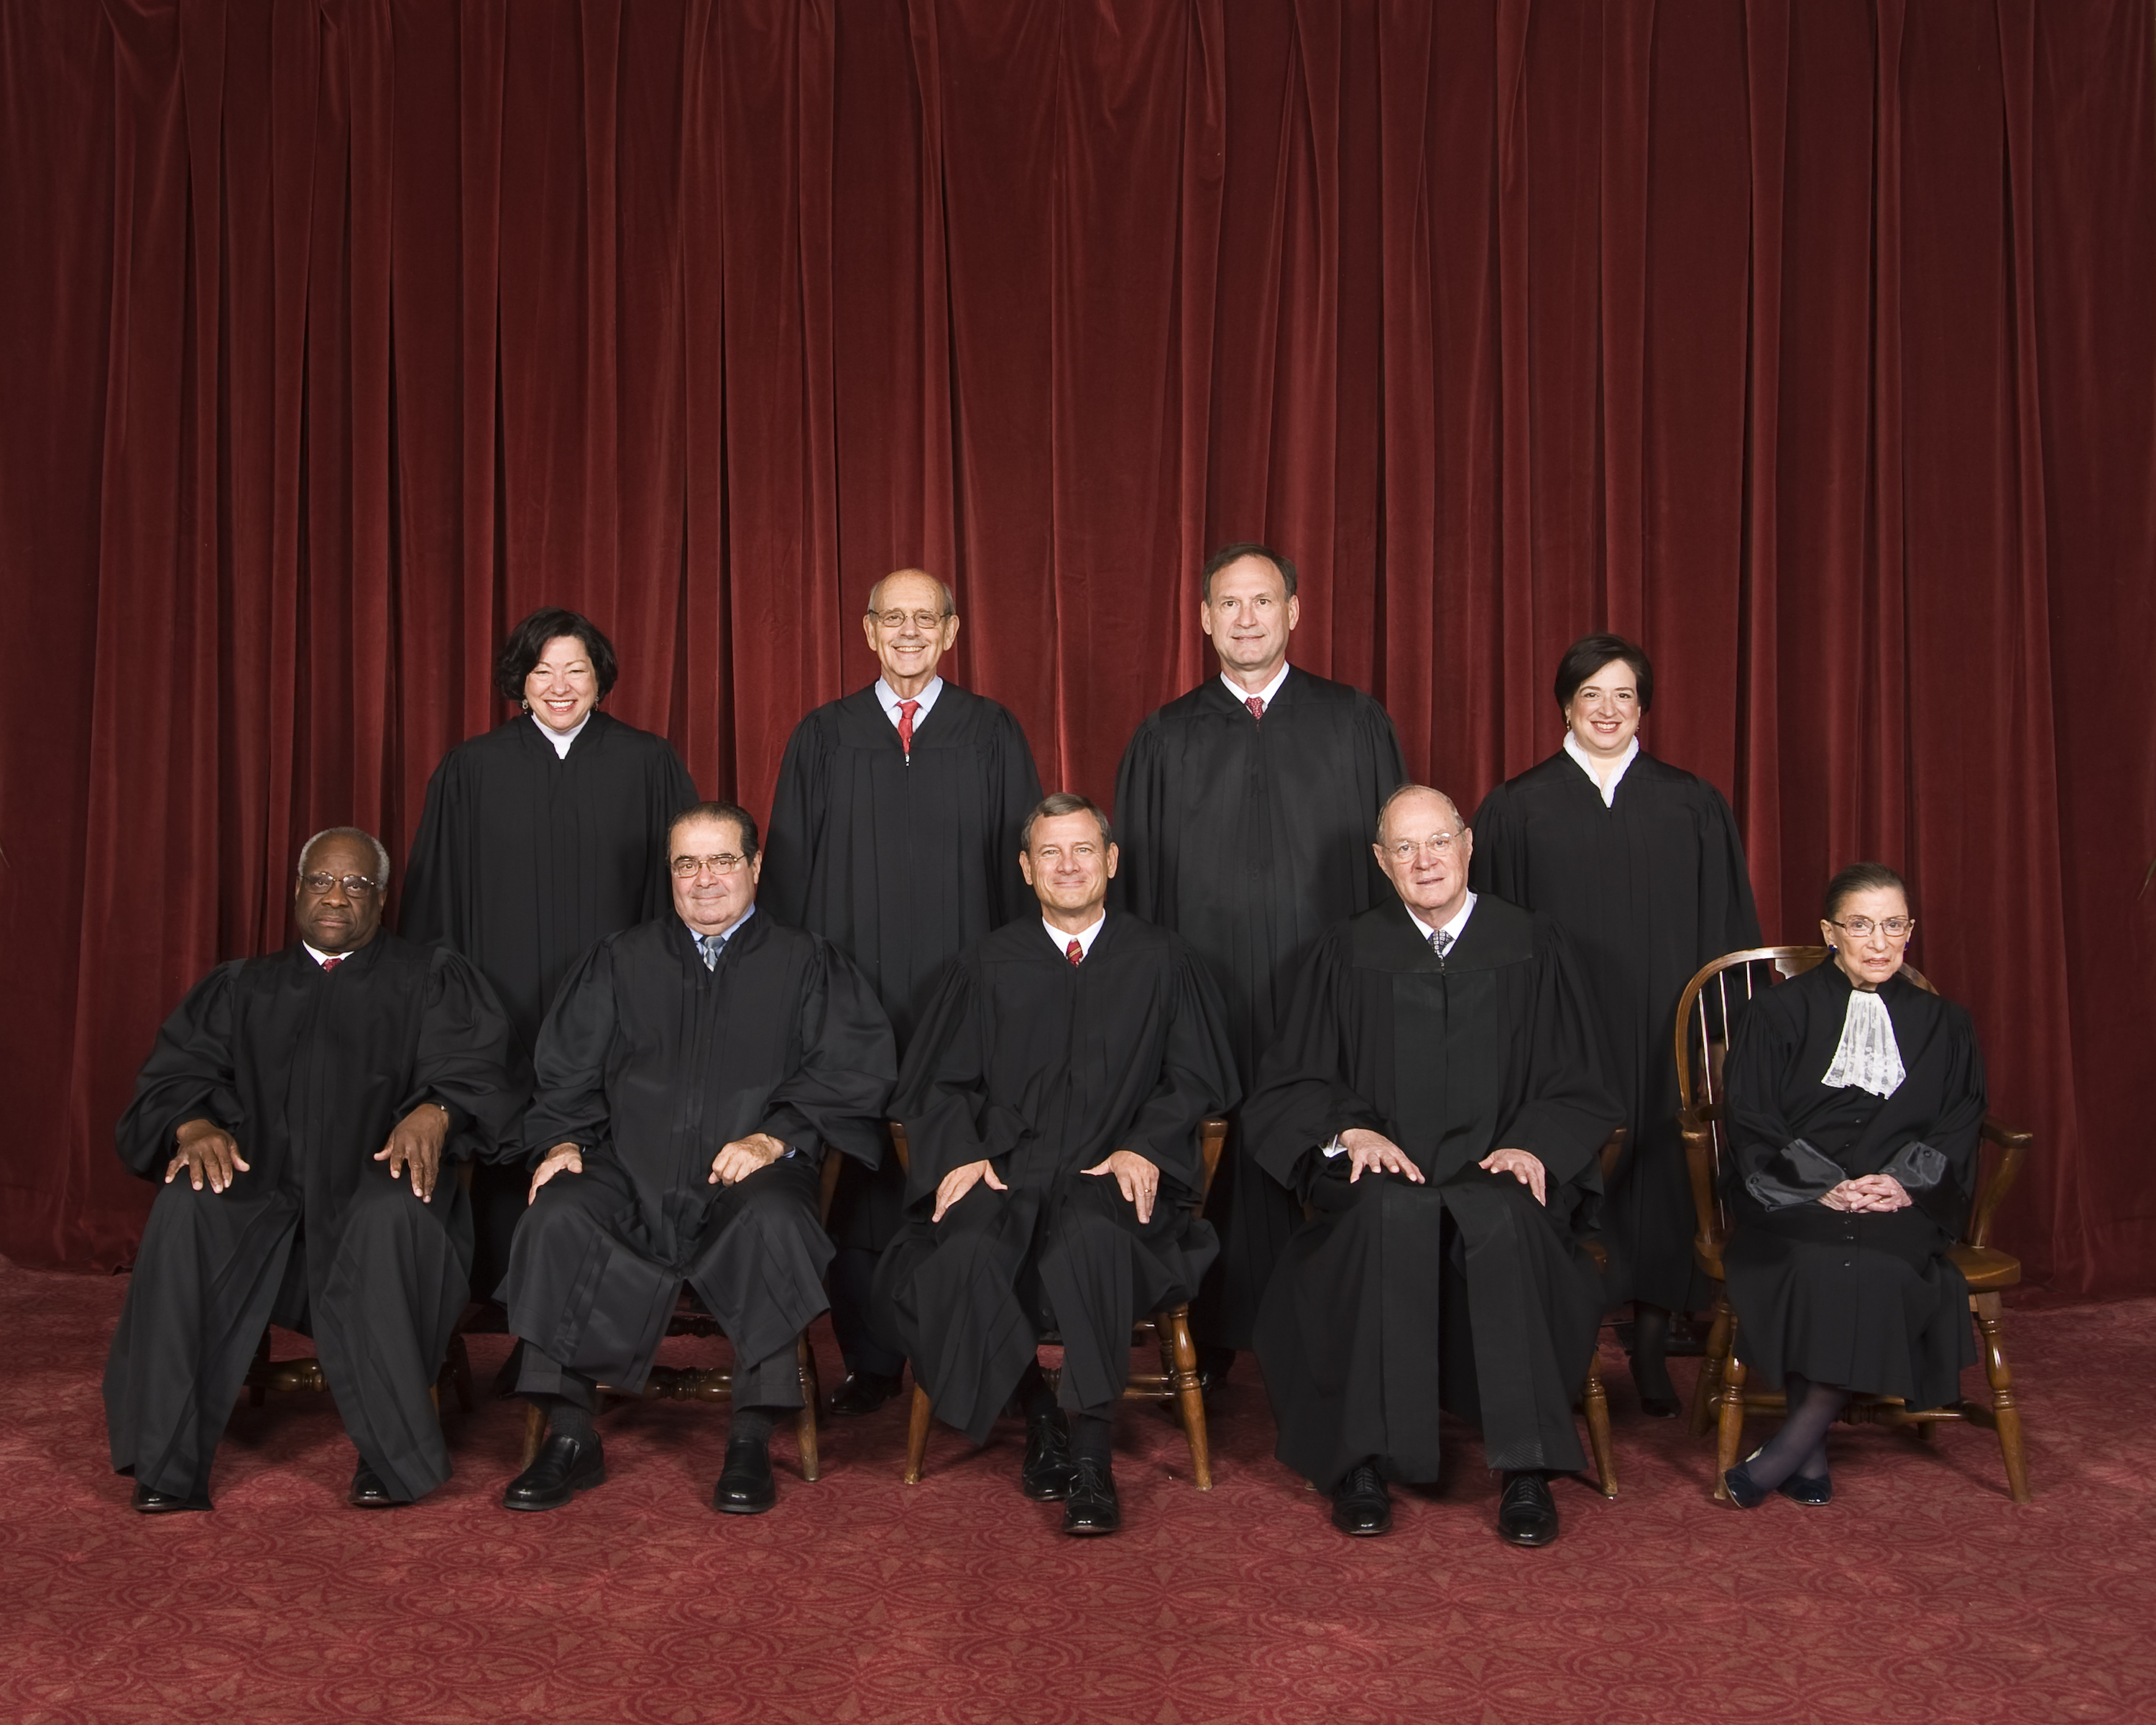 With the Supreme Court’s historic ruling 5-4 today on the Defense of